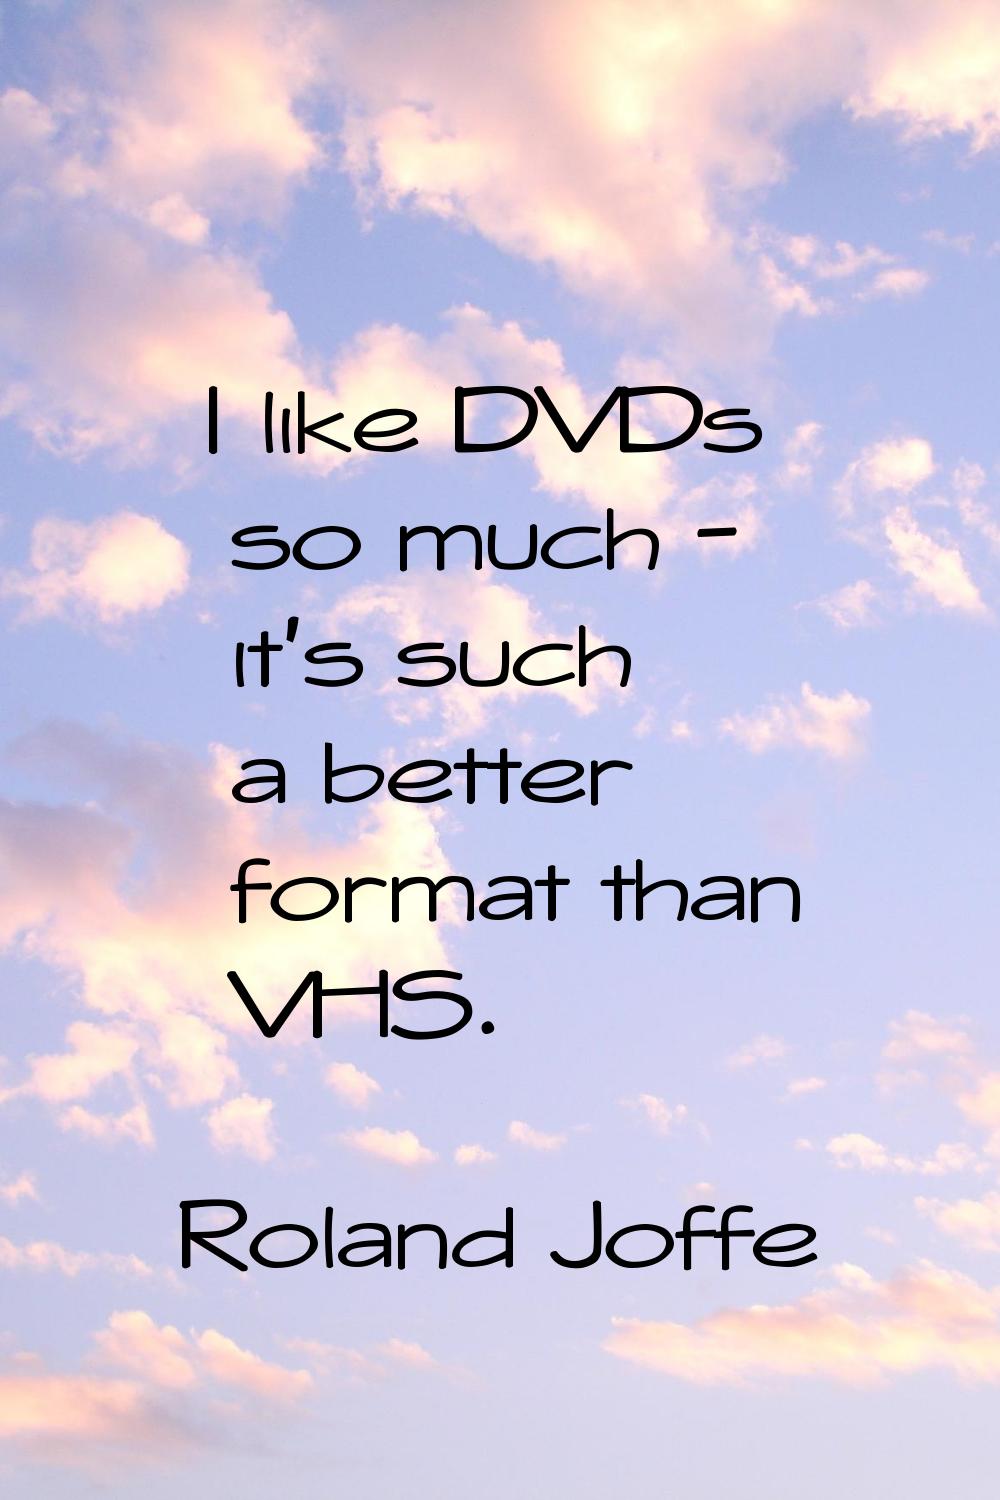 I like DVDs so much - it's such a better format than VHS.